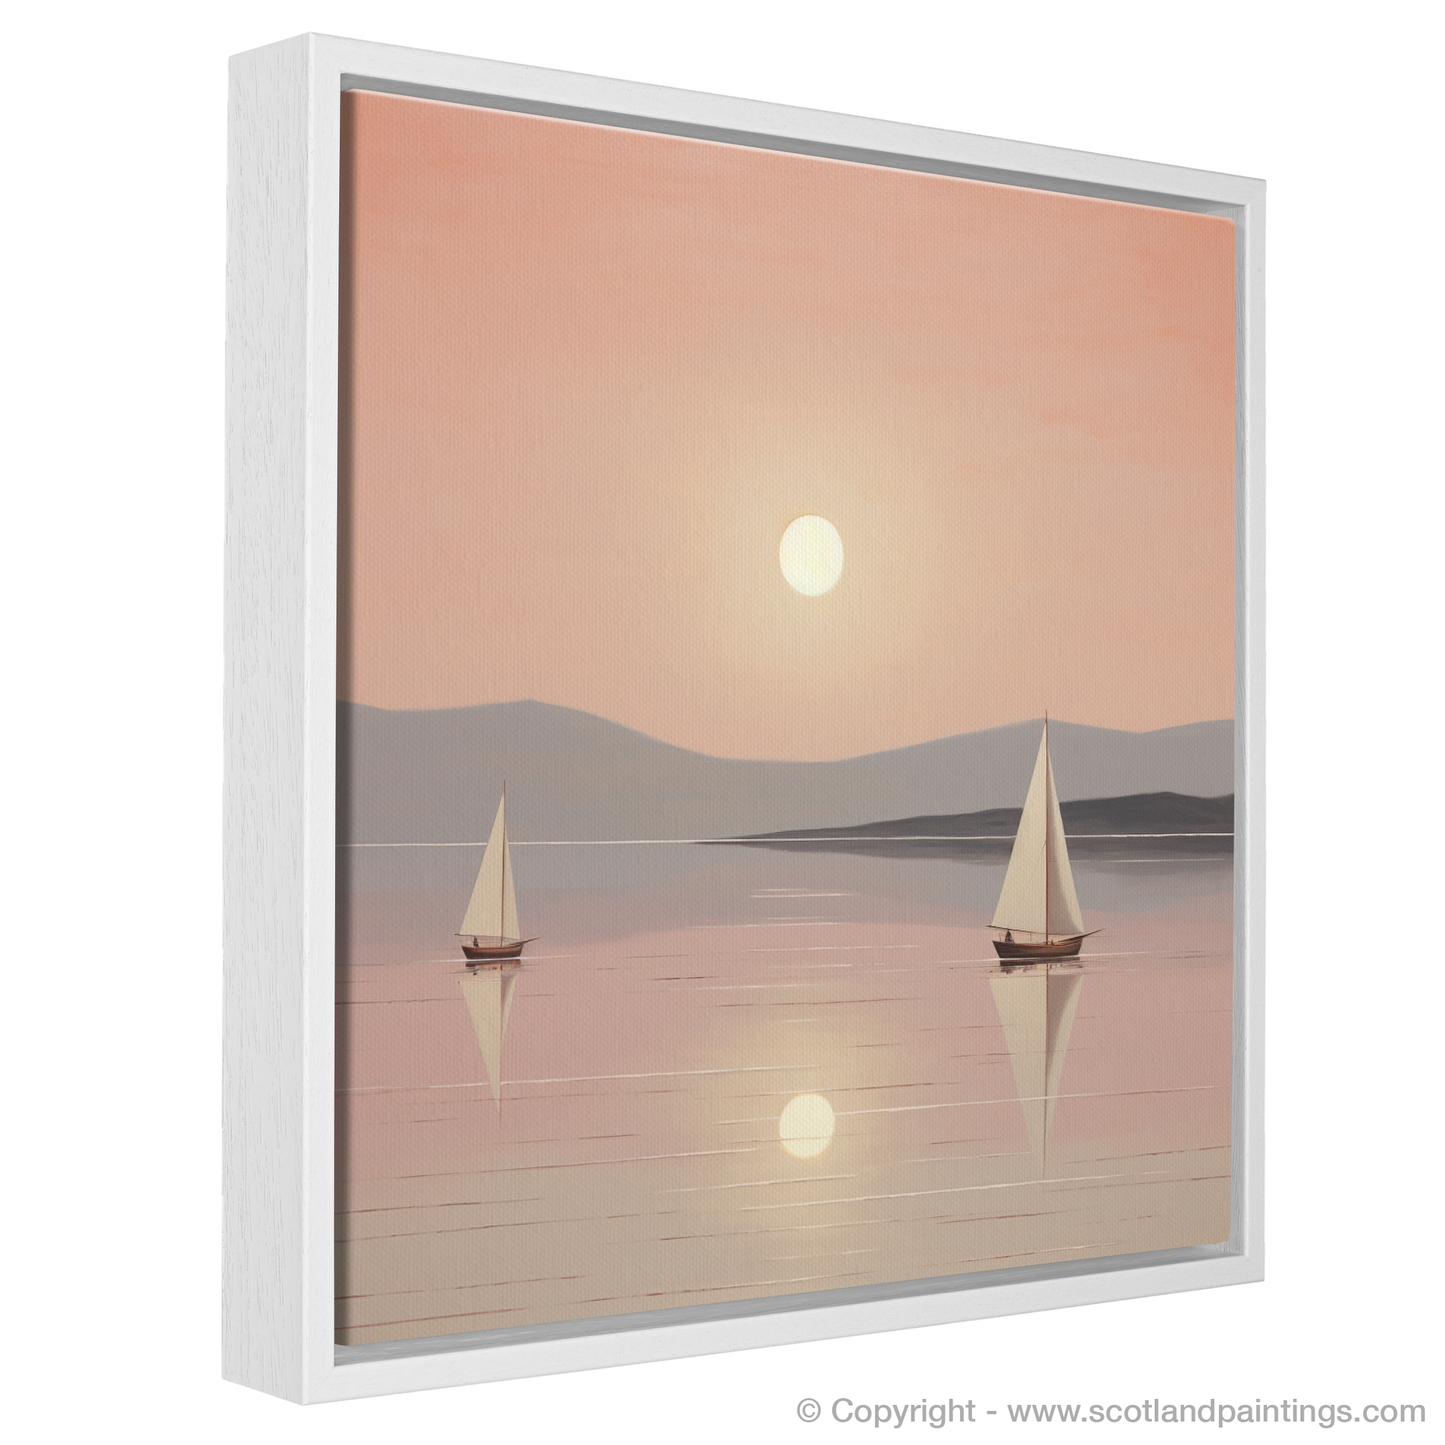 Painting and Art Print of Sailing boats on Loch Lomond at sunset entitled "Sailing into Serenity: Sunset on Loch Lomond".